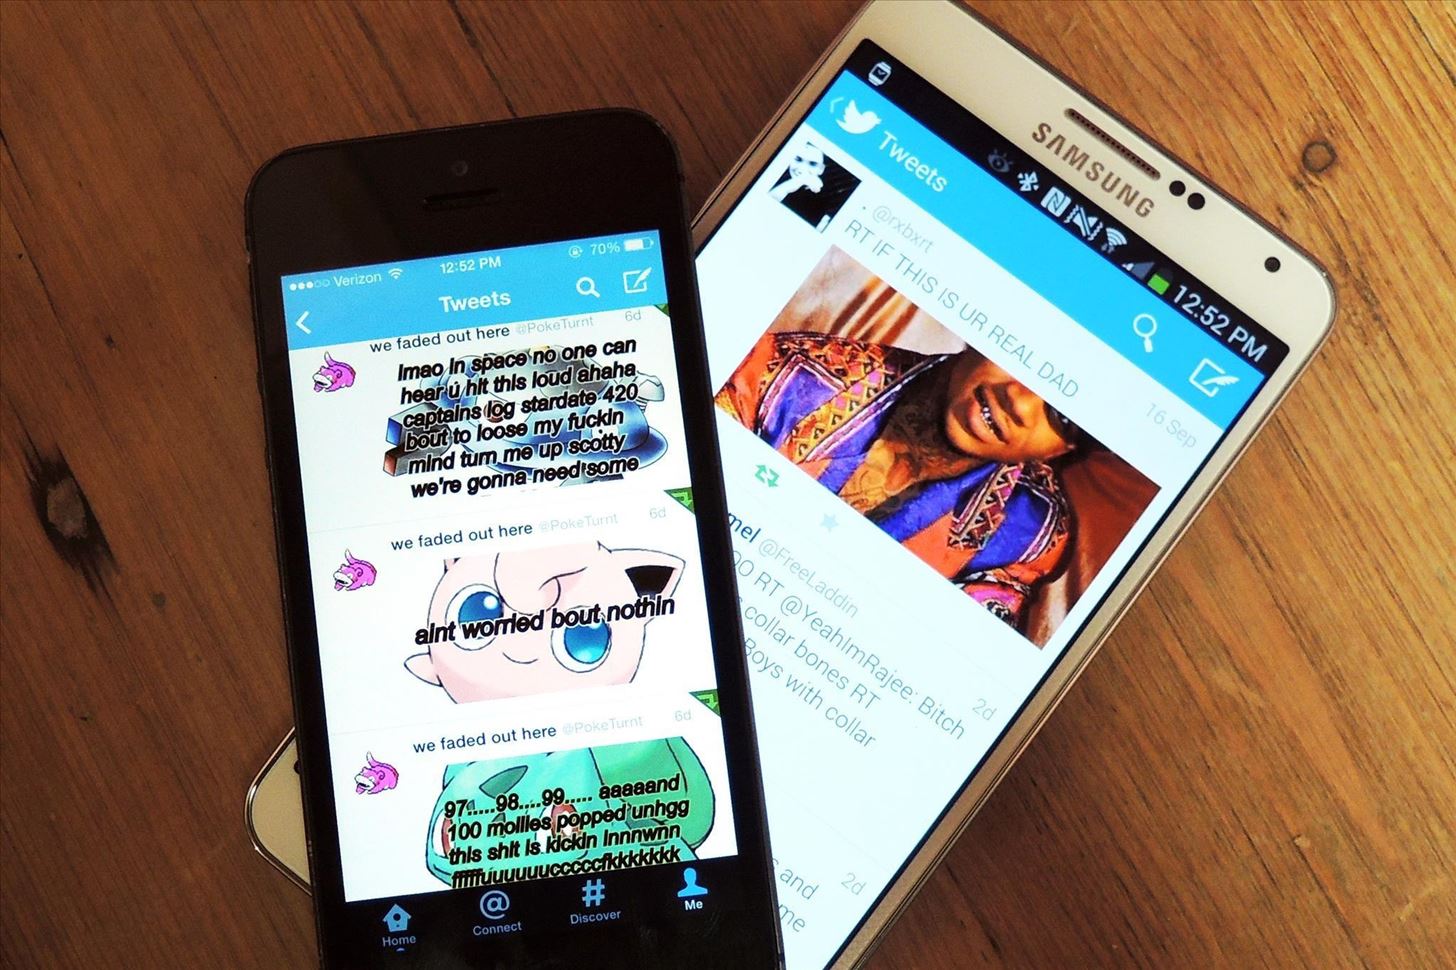 How to Remove Those Annoying Image Previews on the Updated Twitter Apps for Android & iPhone